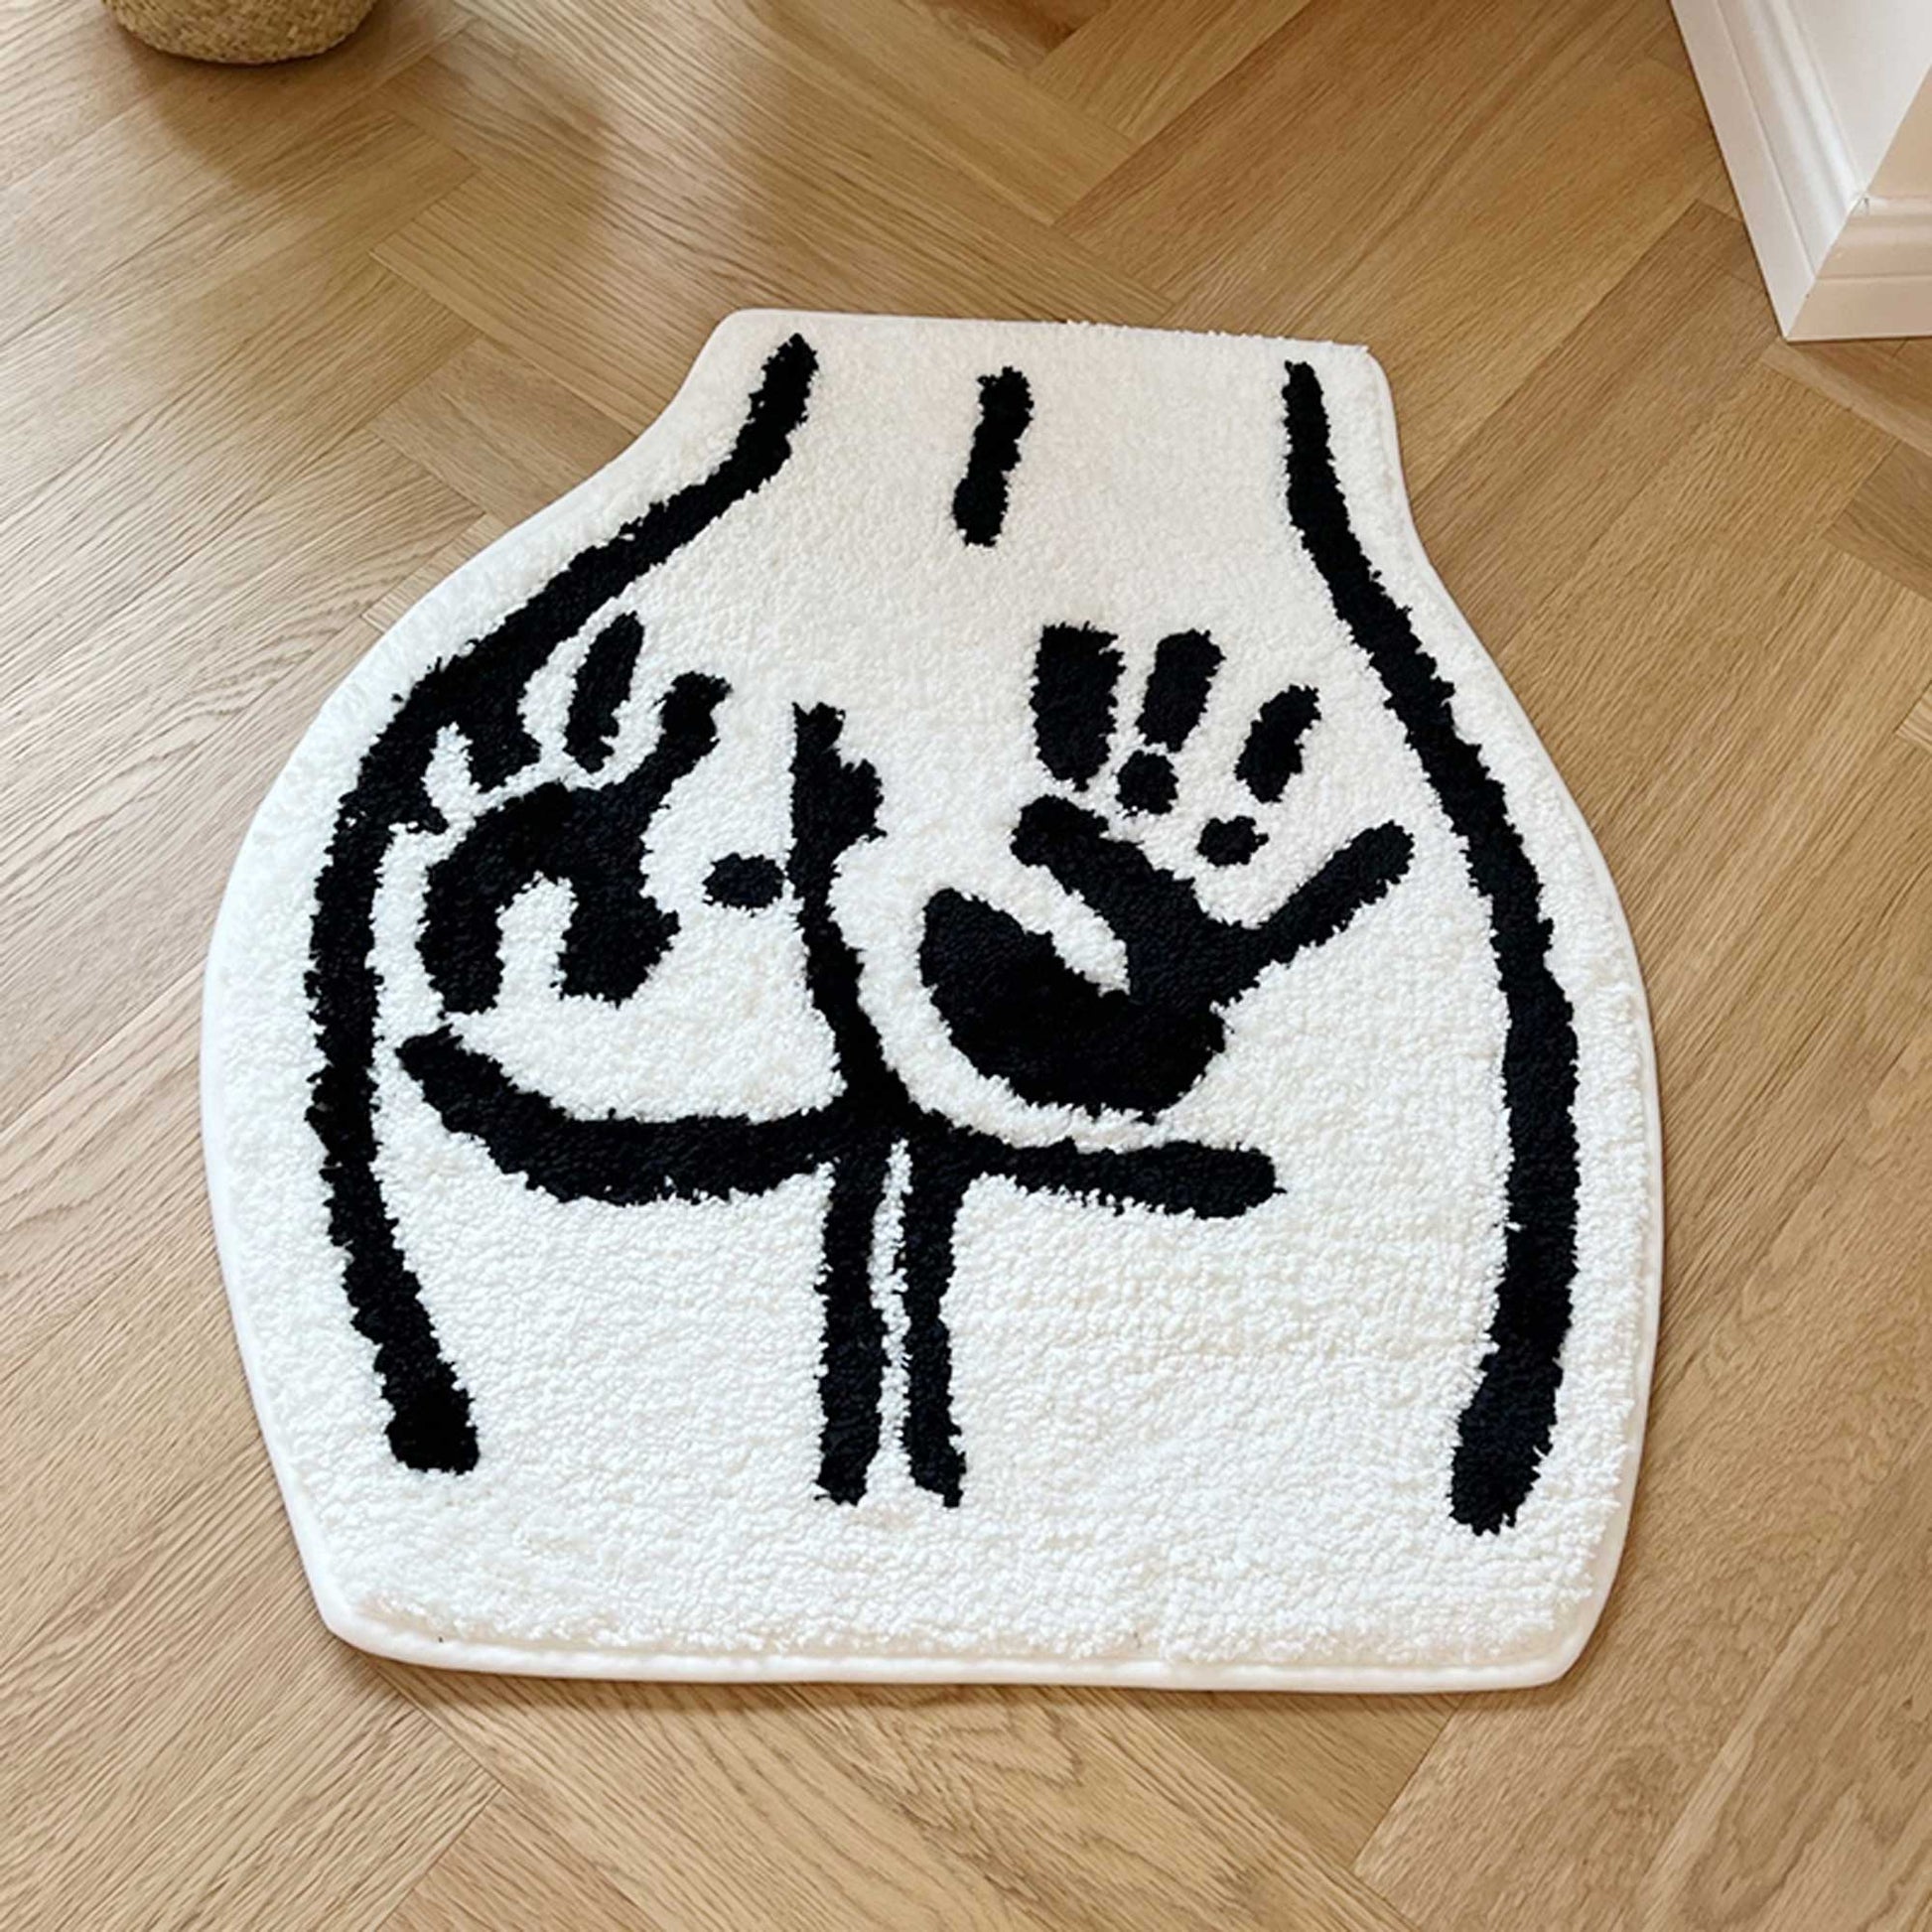 Tufted Rug Handprint on Booty Rug Front